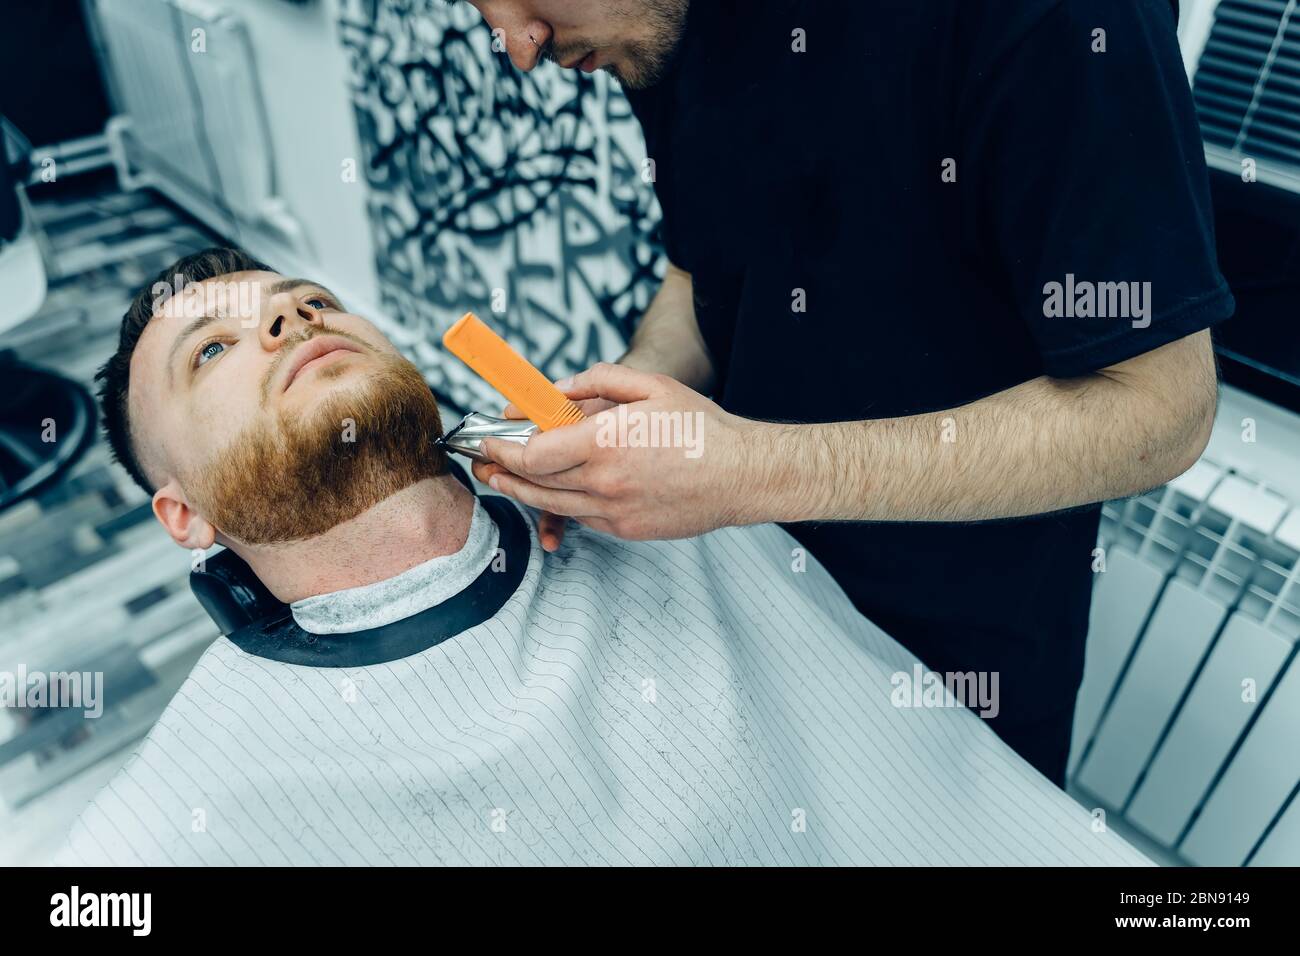 Barber trimming bearded man with shaving machine in barbershop. Hairstyling process. Close-up of a Hairstylist cutting the beard of a bearded male. Stock Photo